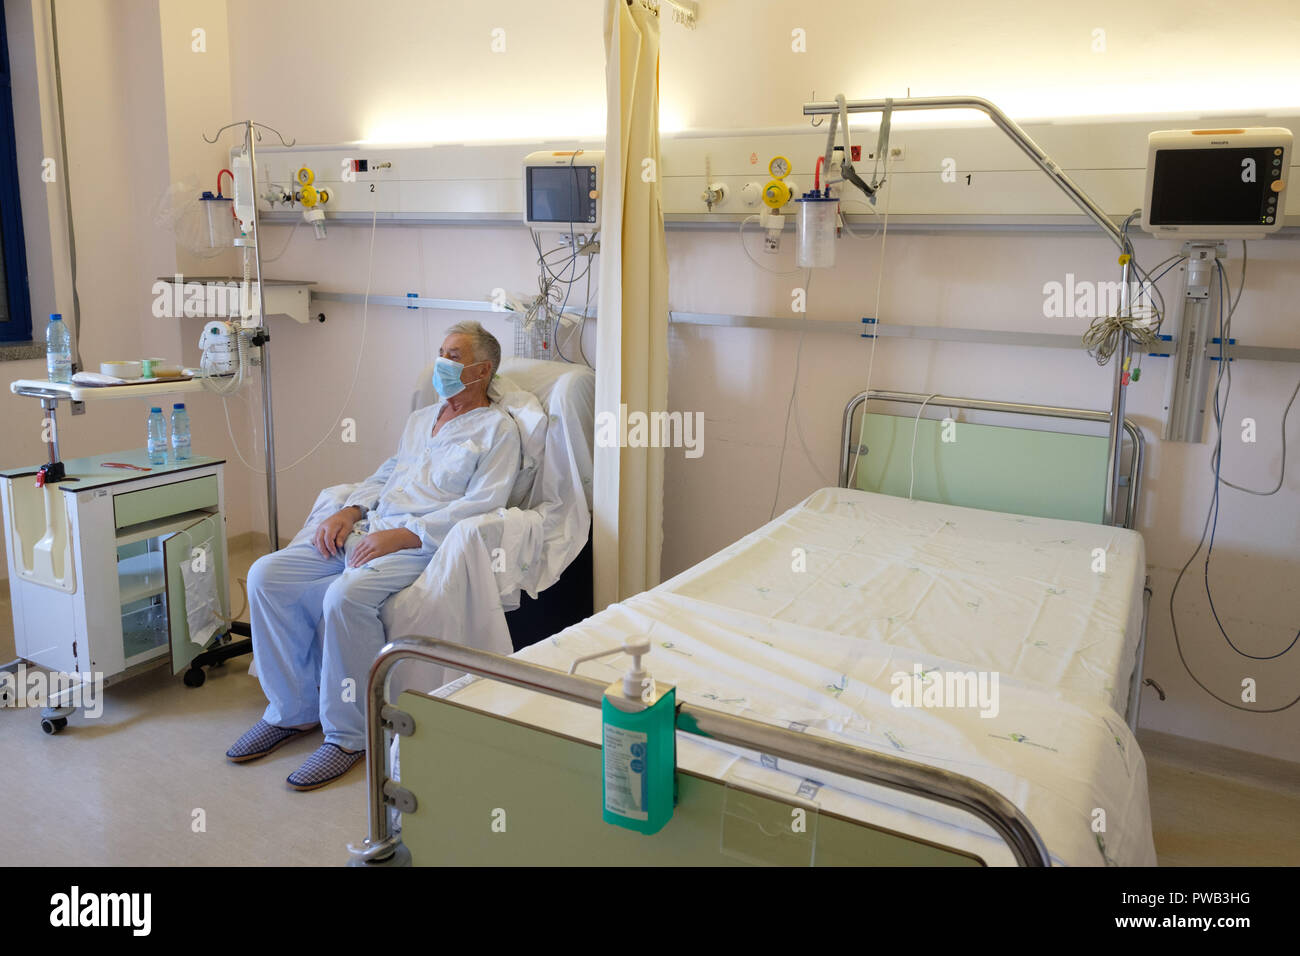 Patient wearing mask while sitting in a hospital bedroom Stock Photo